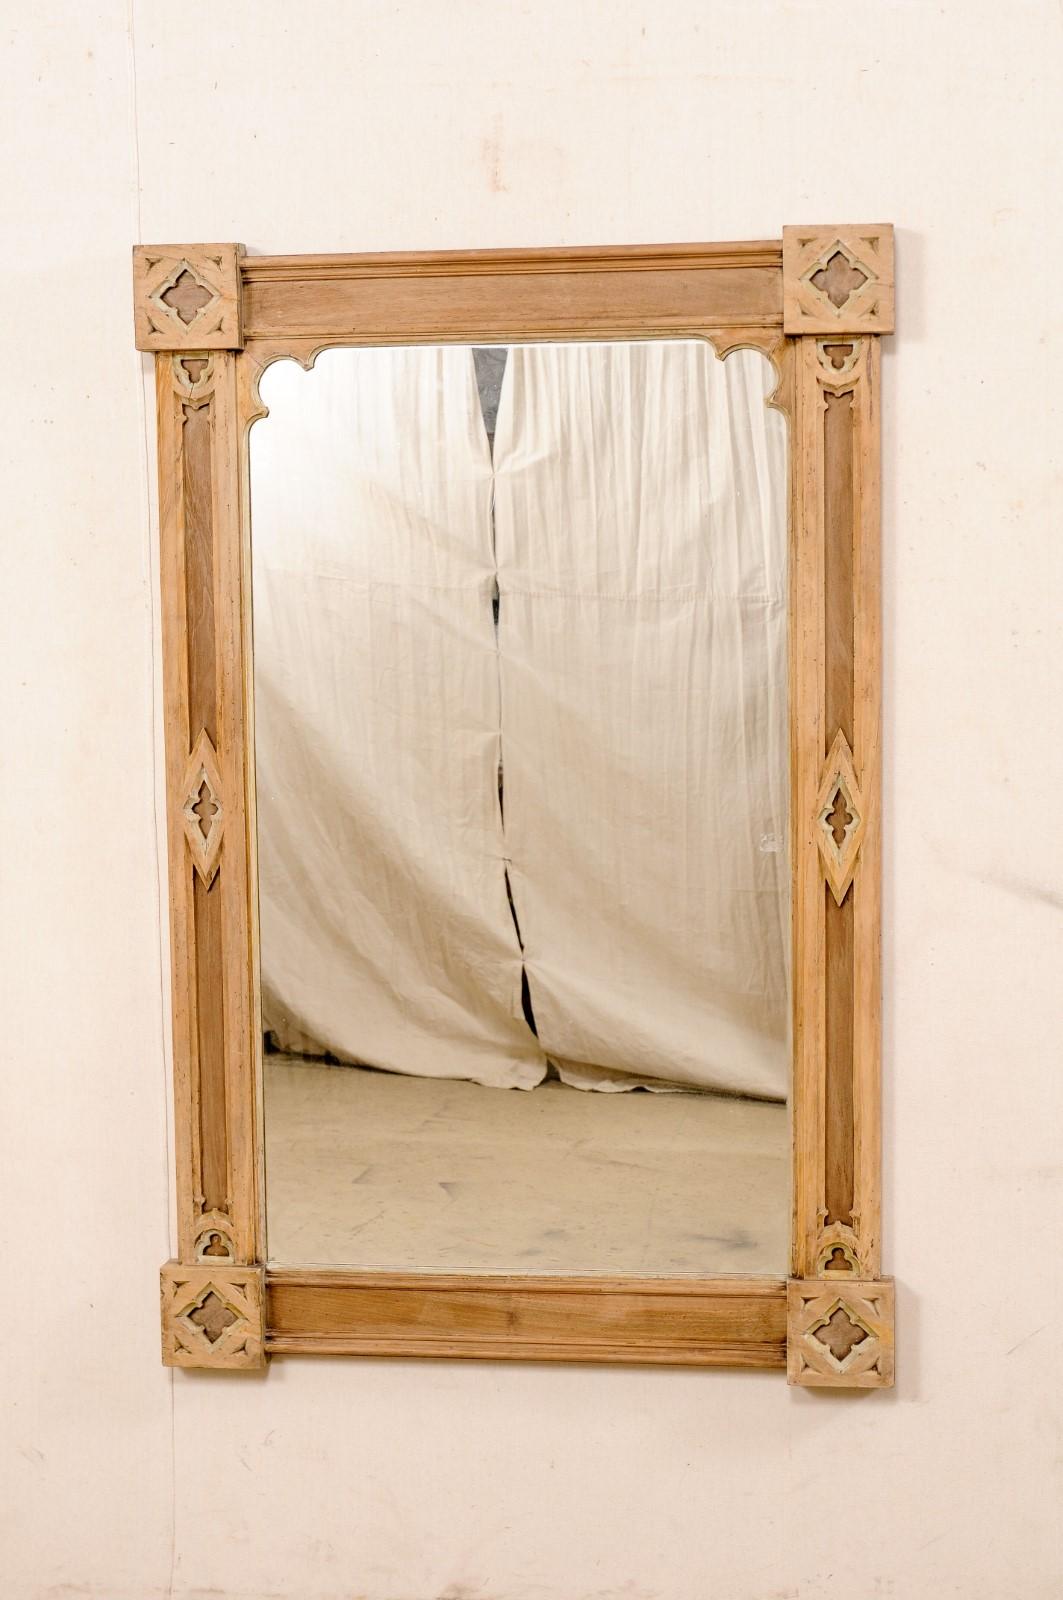 An English Neo-Gothic caved-wood mirror from the 19th century. This antique wall mirror from England is rectangular-shaped with prominent square accents at each corner. Diamond-shaped accents are carved and set within the side molding, and typical